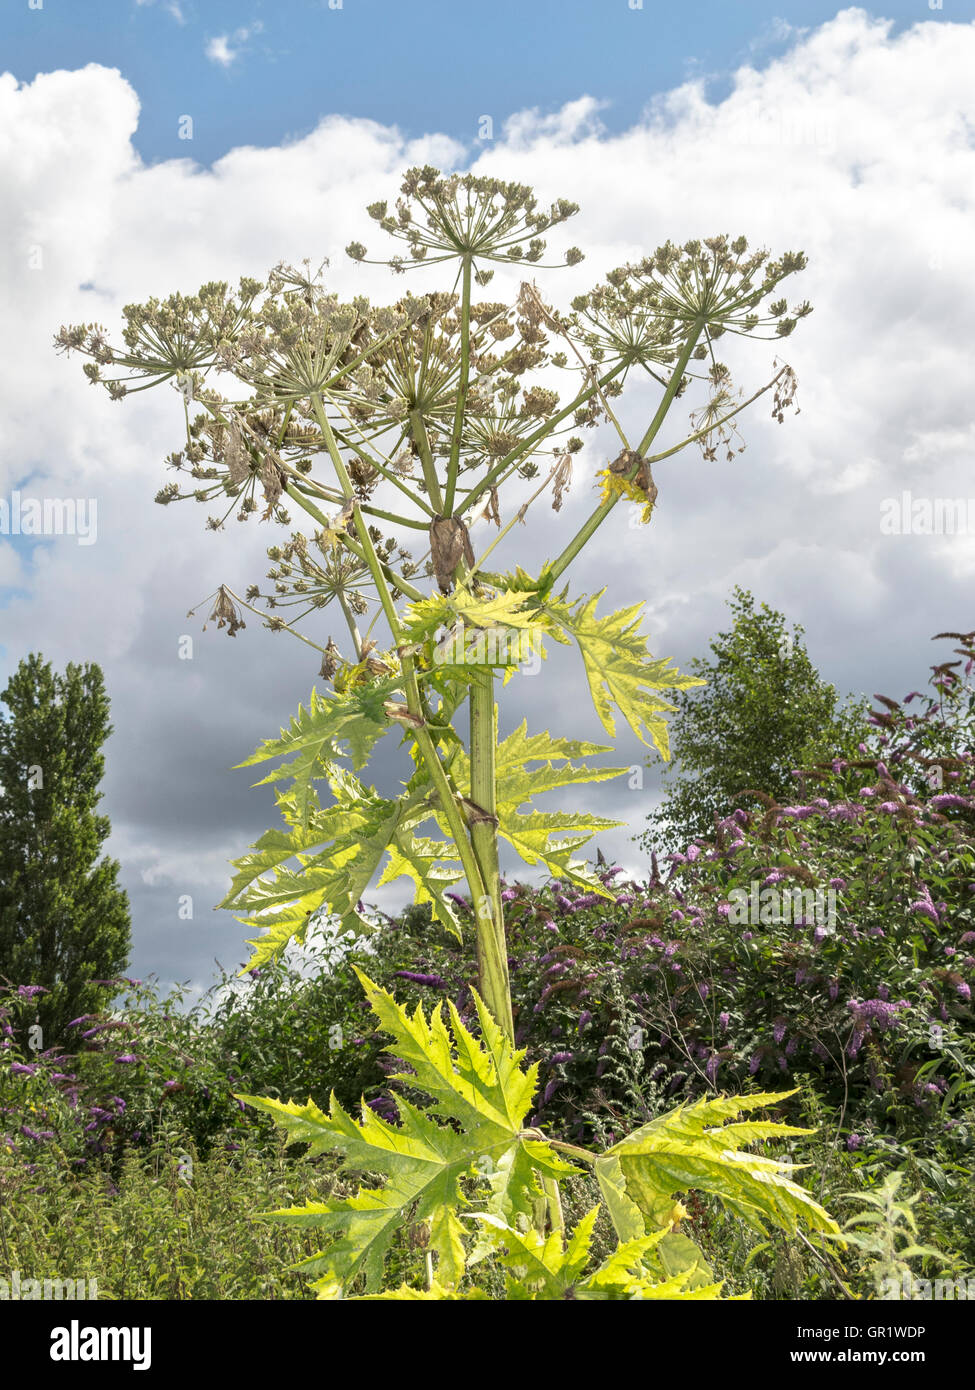 Giant Hog weed (Heracleum mantegazzianum) growing along the banks of the River Aire, Leeds. Stock Photo